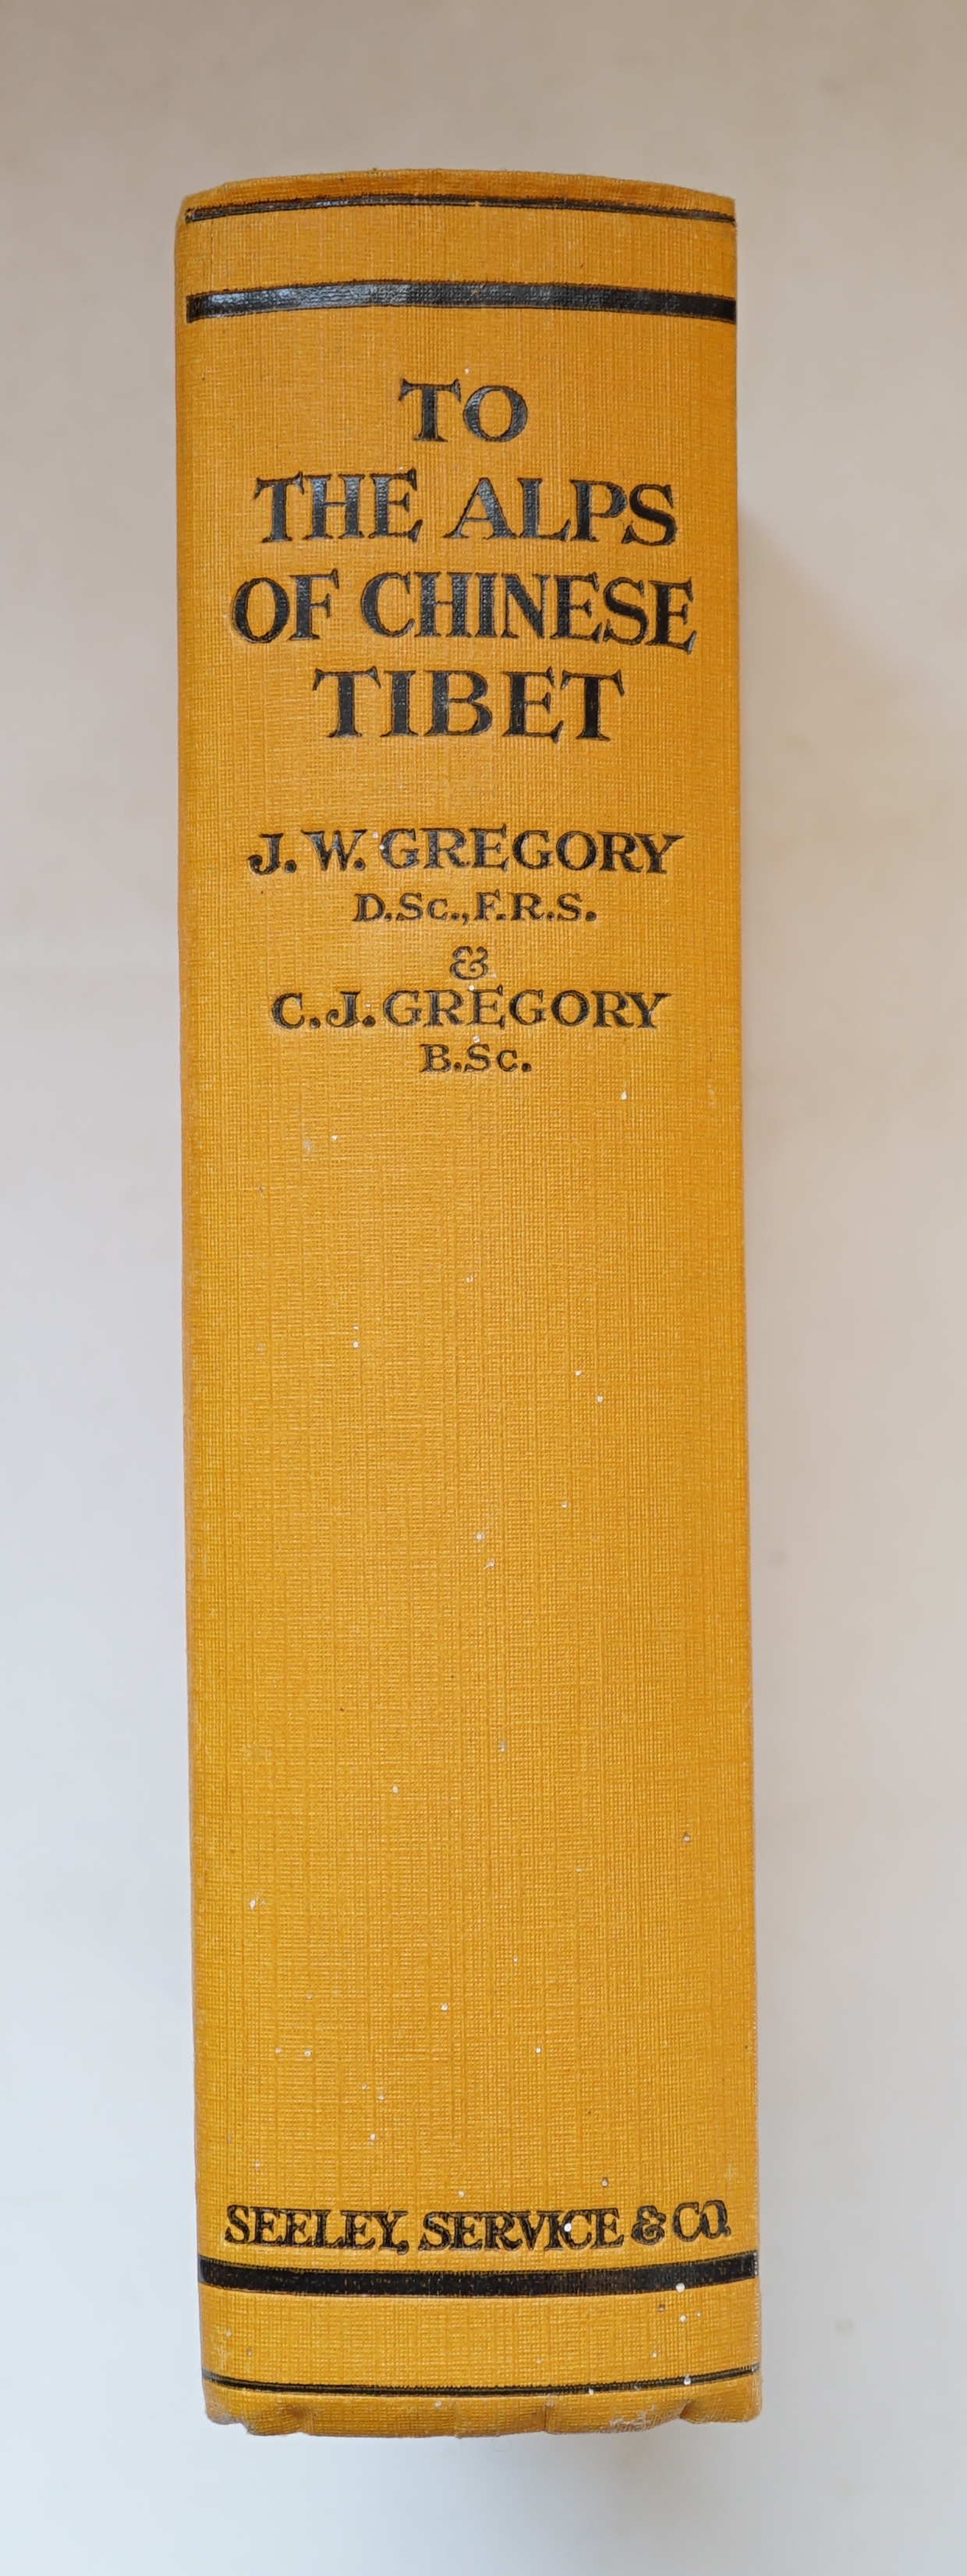 W. Gregory & C. J. Gregory - To the Alps of Chinese Tibet, An Account of a Journey of Exploration up to and among the Snow-Clad Mountains of the Tibetan Frontier, 1st edition with 25 black and white illustrations, 7 sket